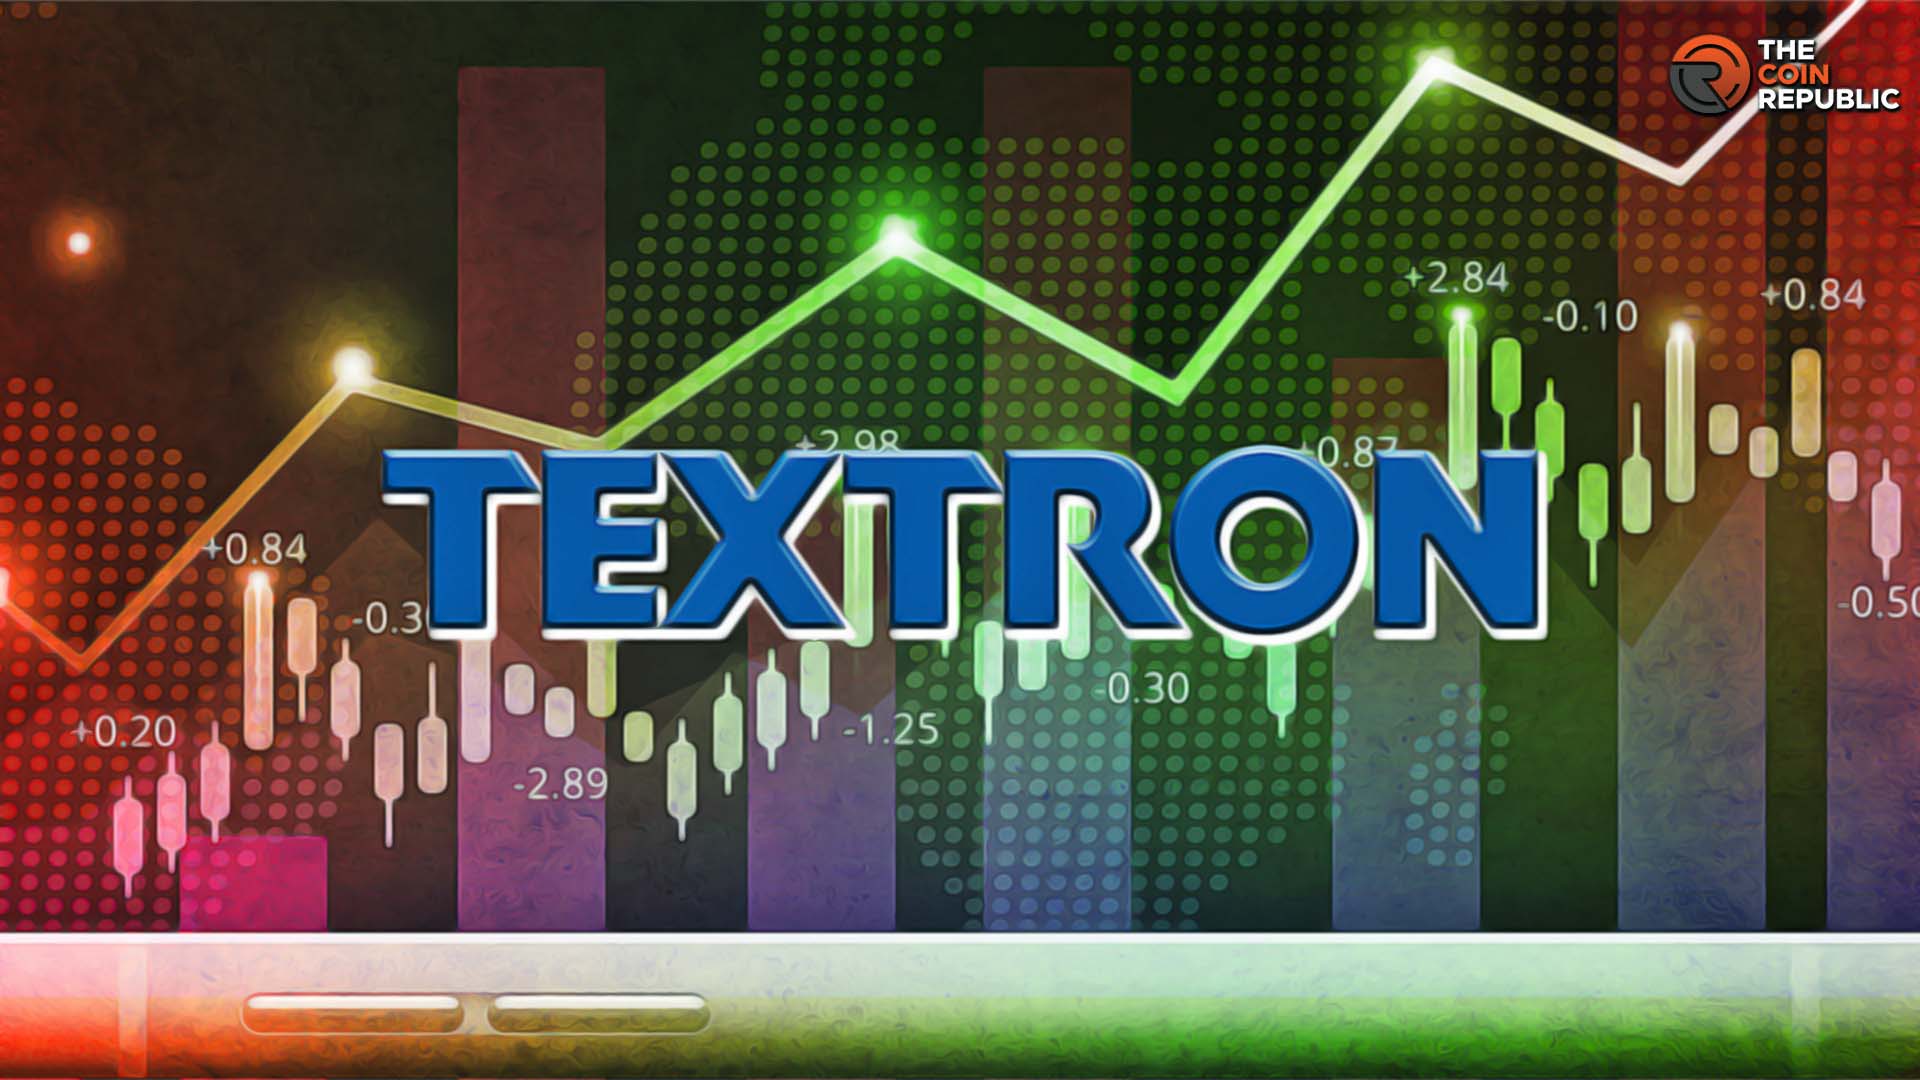 Textron Inc.(TXT Stock) Showed Breakout Above Major Hurdle of $75